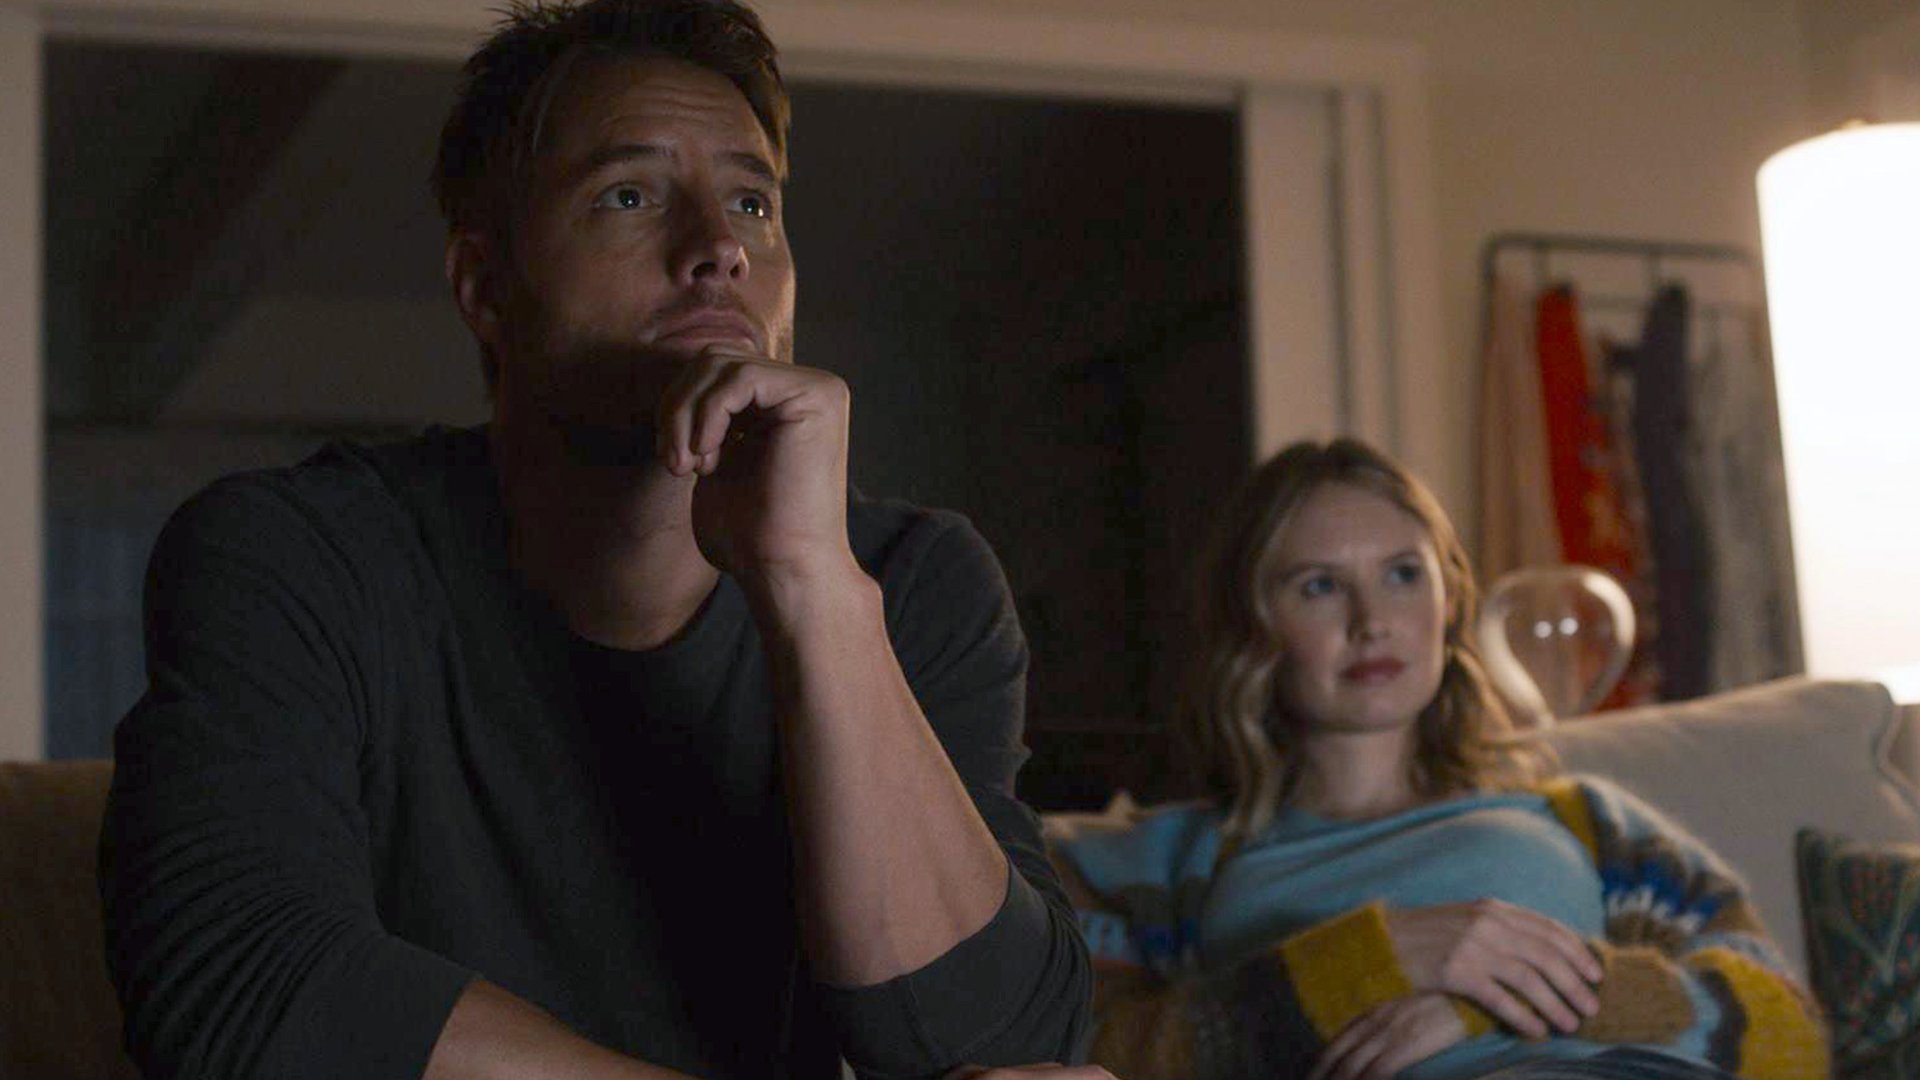 Justin Hartley as Kevin and Caitlin Thompson as Madison on 'This Is Us' Season 5 premiere